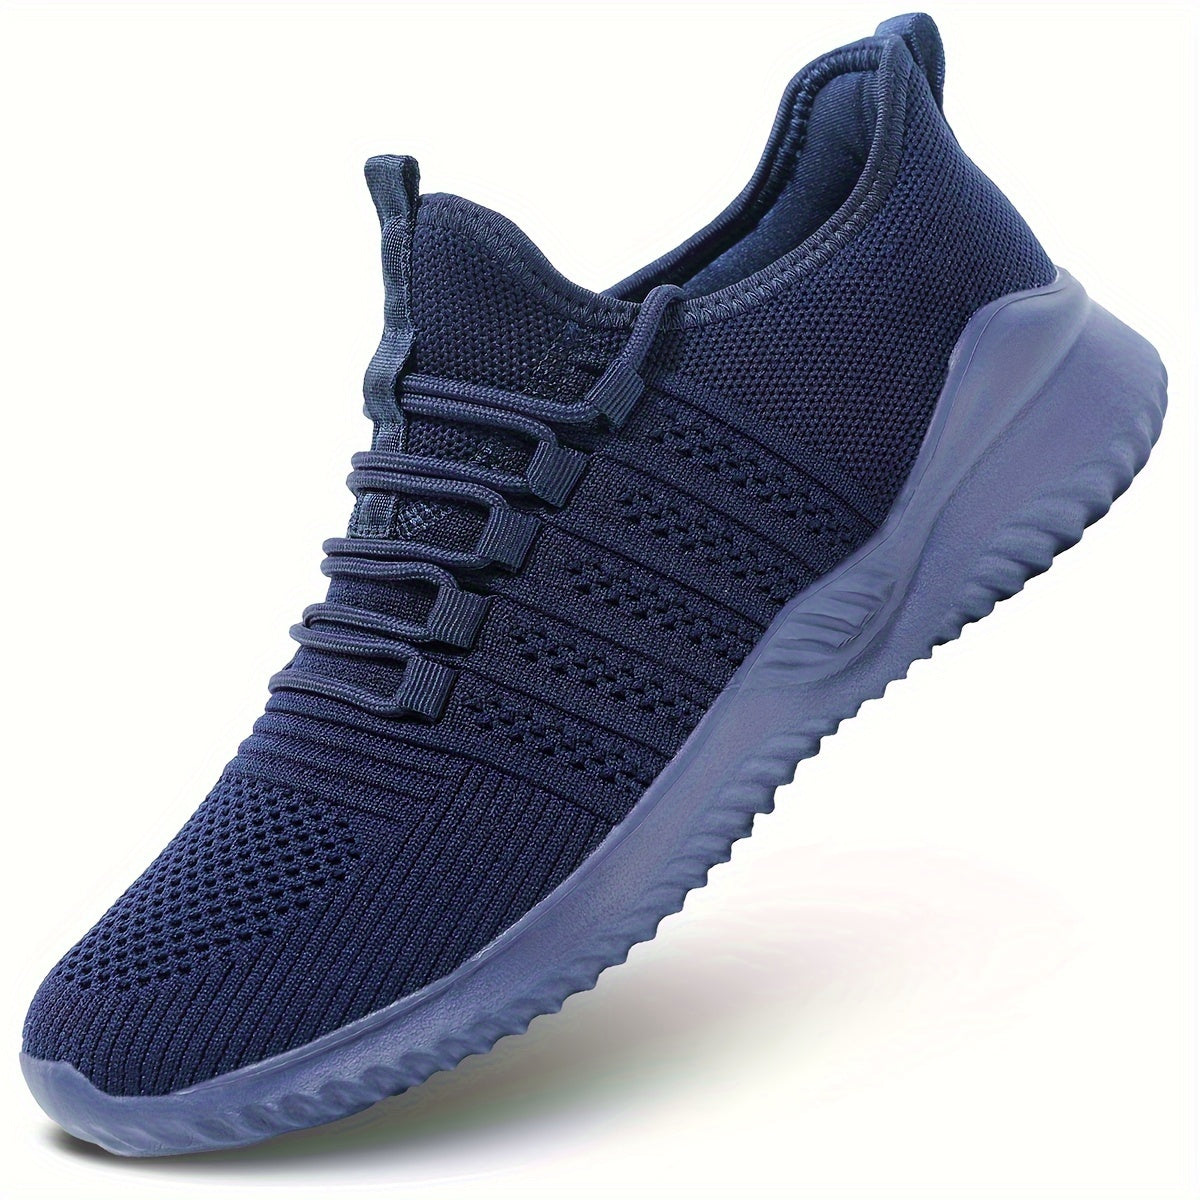 Men's Casual Sneakers - Breathable Lace-up Shoes with Fabric Uppers for Outdoor Walking and Running